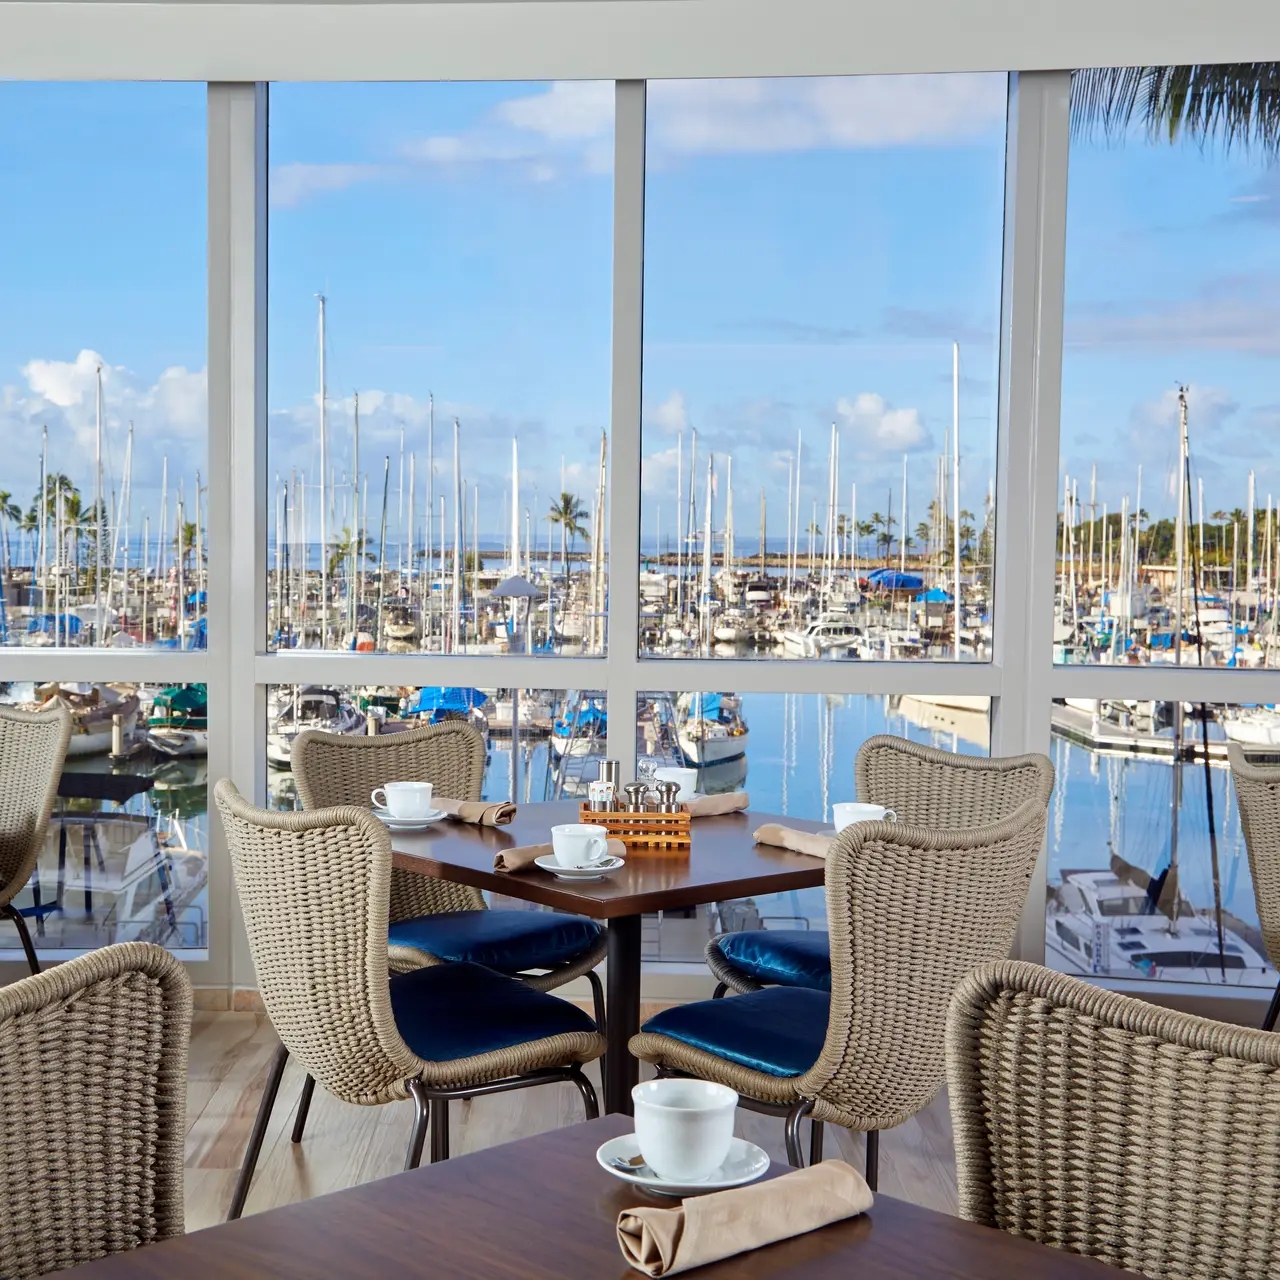 100 Sails Restaurant & Bar is a Restaurant located in the city of Waikiki on Oahu, Hawaii